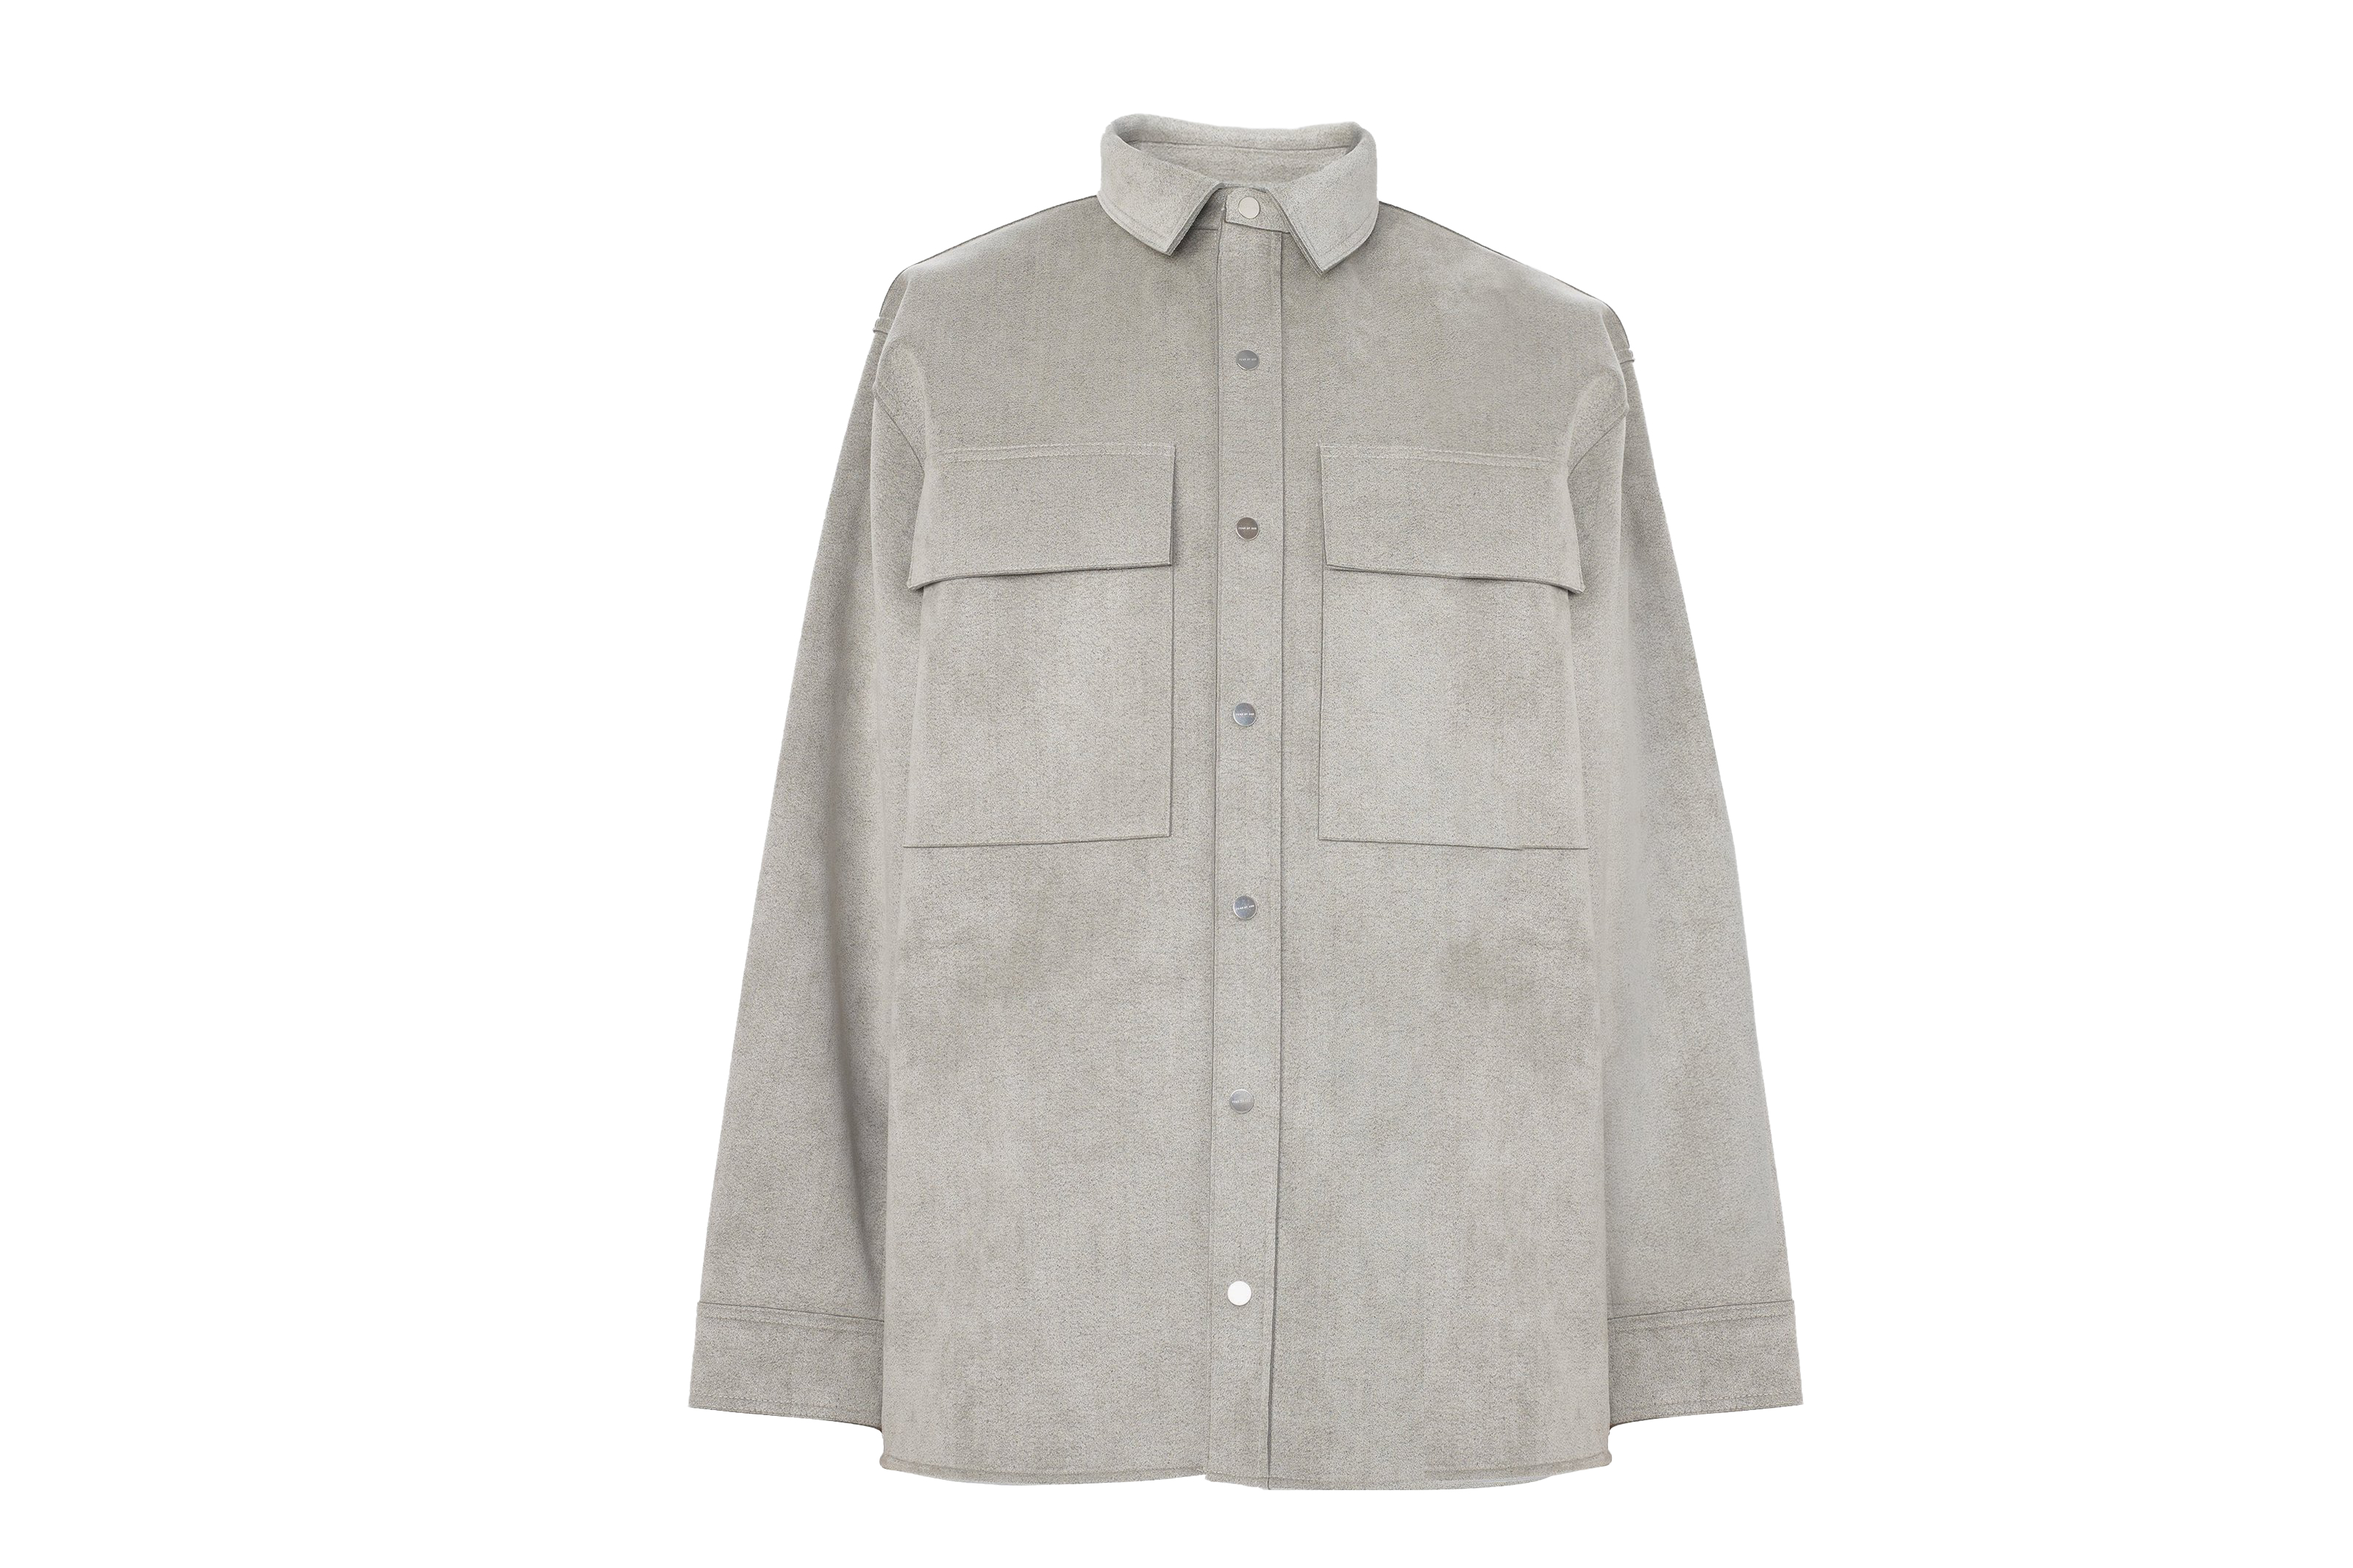 FEAR OF GOD Utrasuede Shirt Jacket Heather Grey - SIXTH COLLECTION